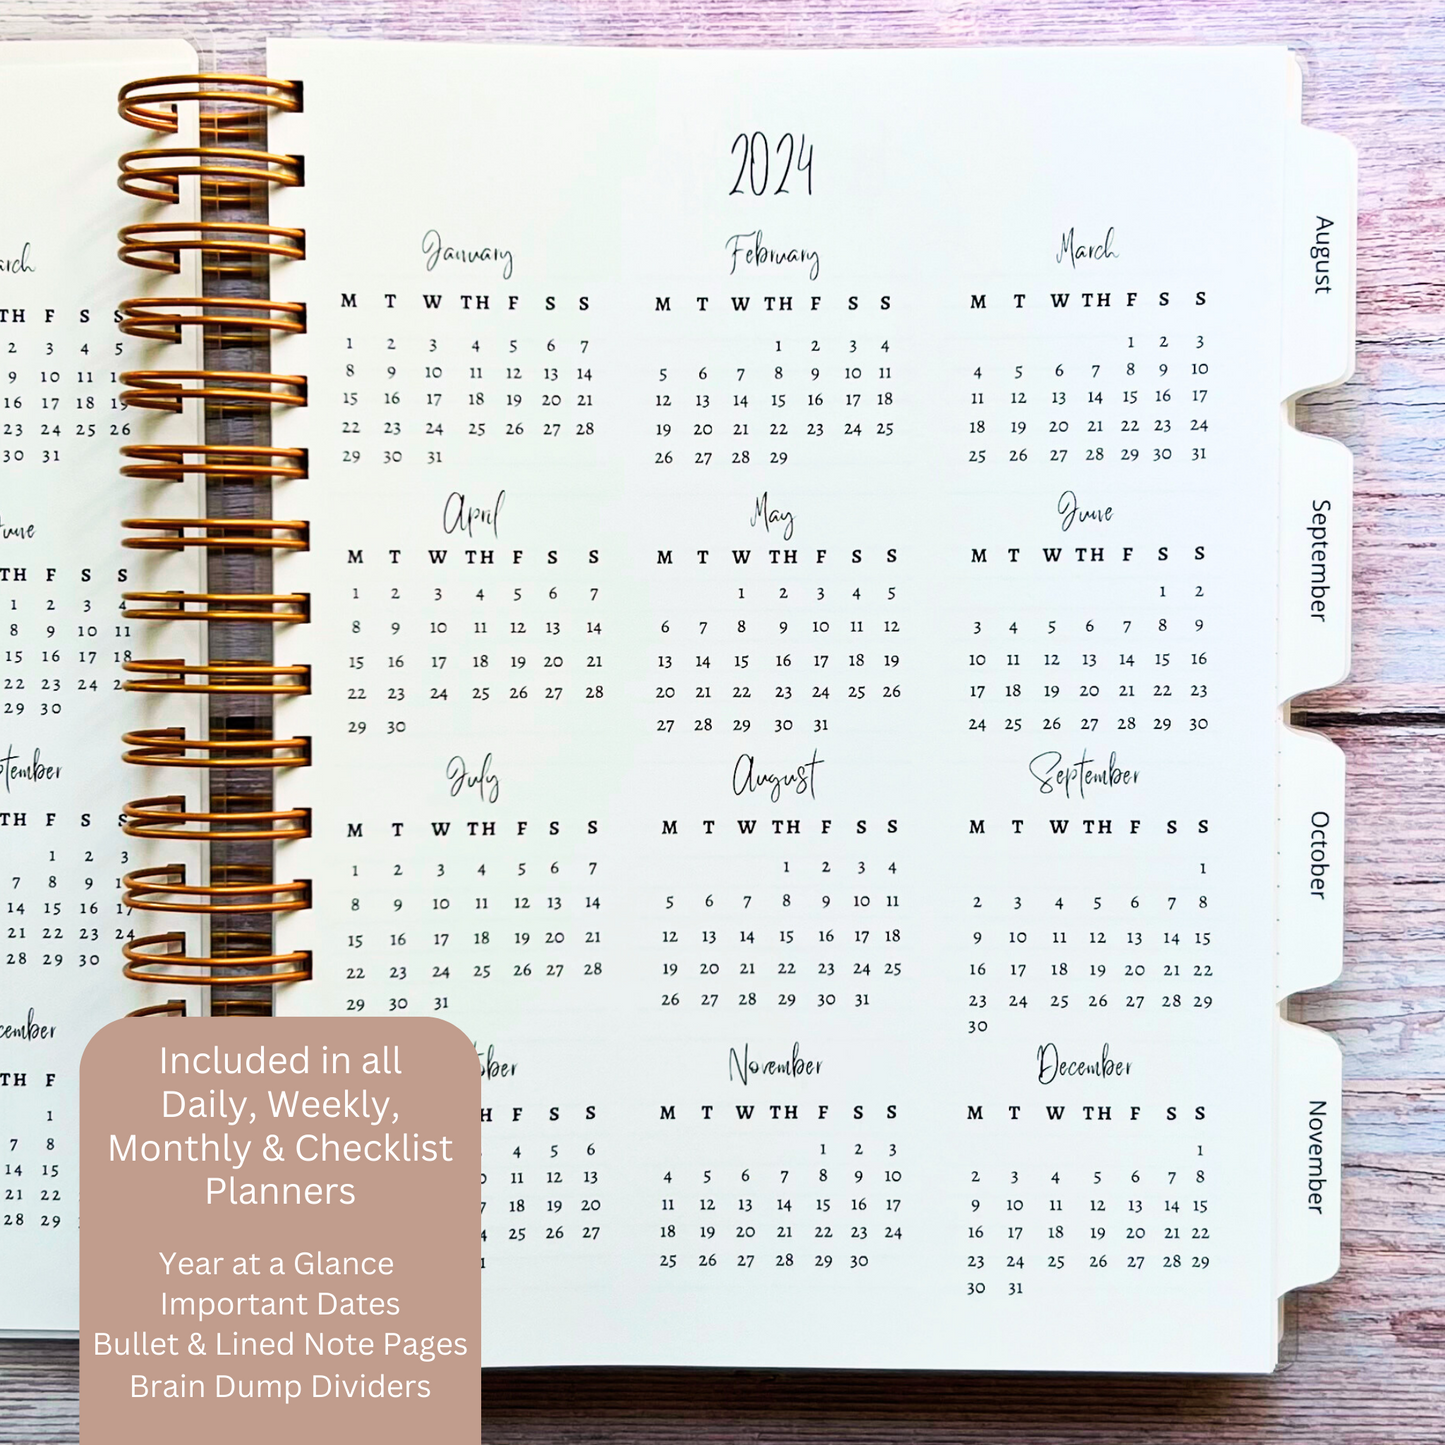 Personalized Monthly Planner - Ethereal Hummingbird Garden